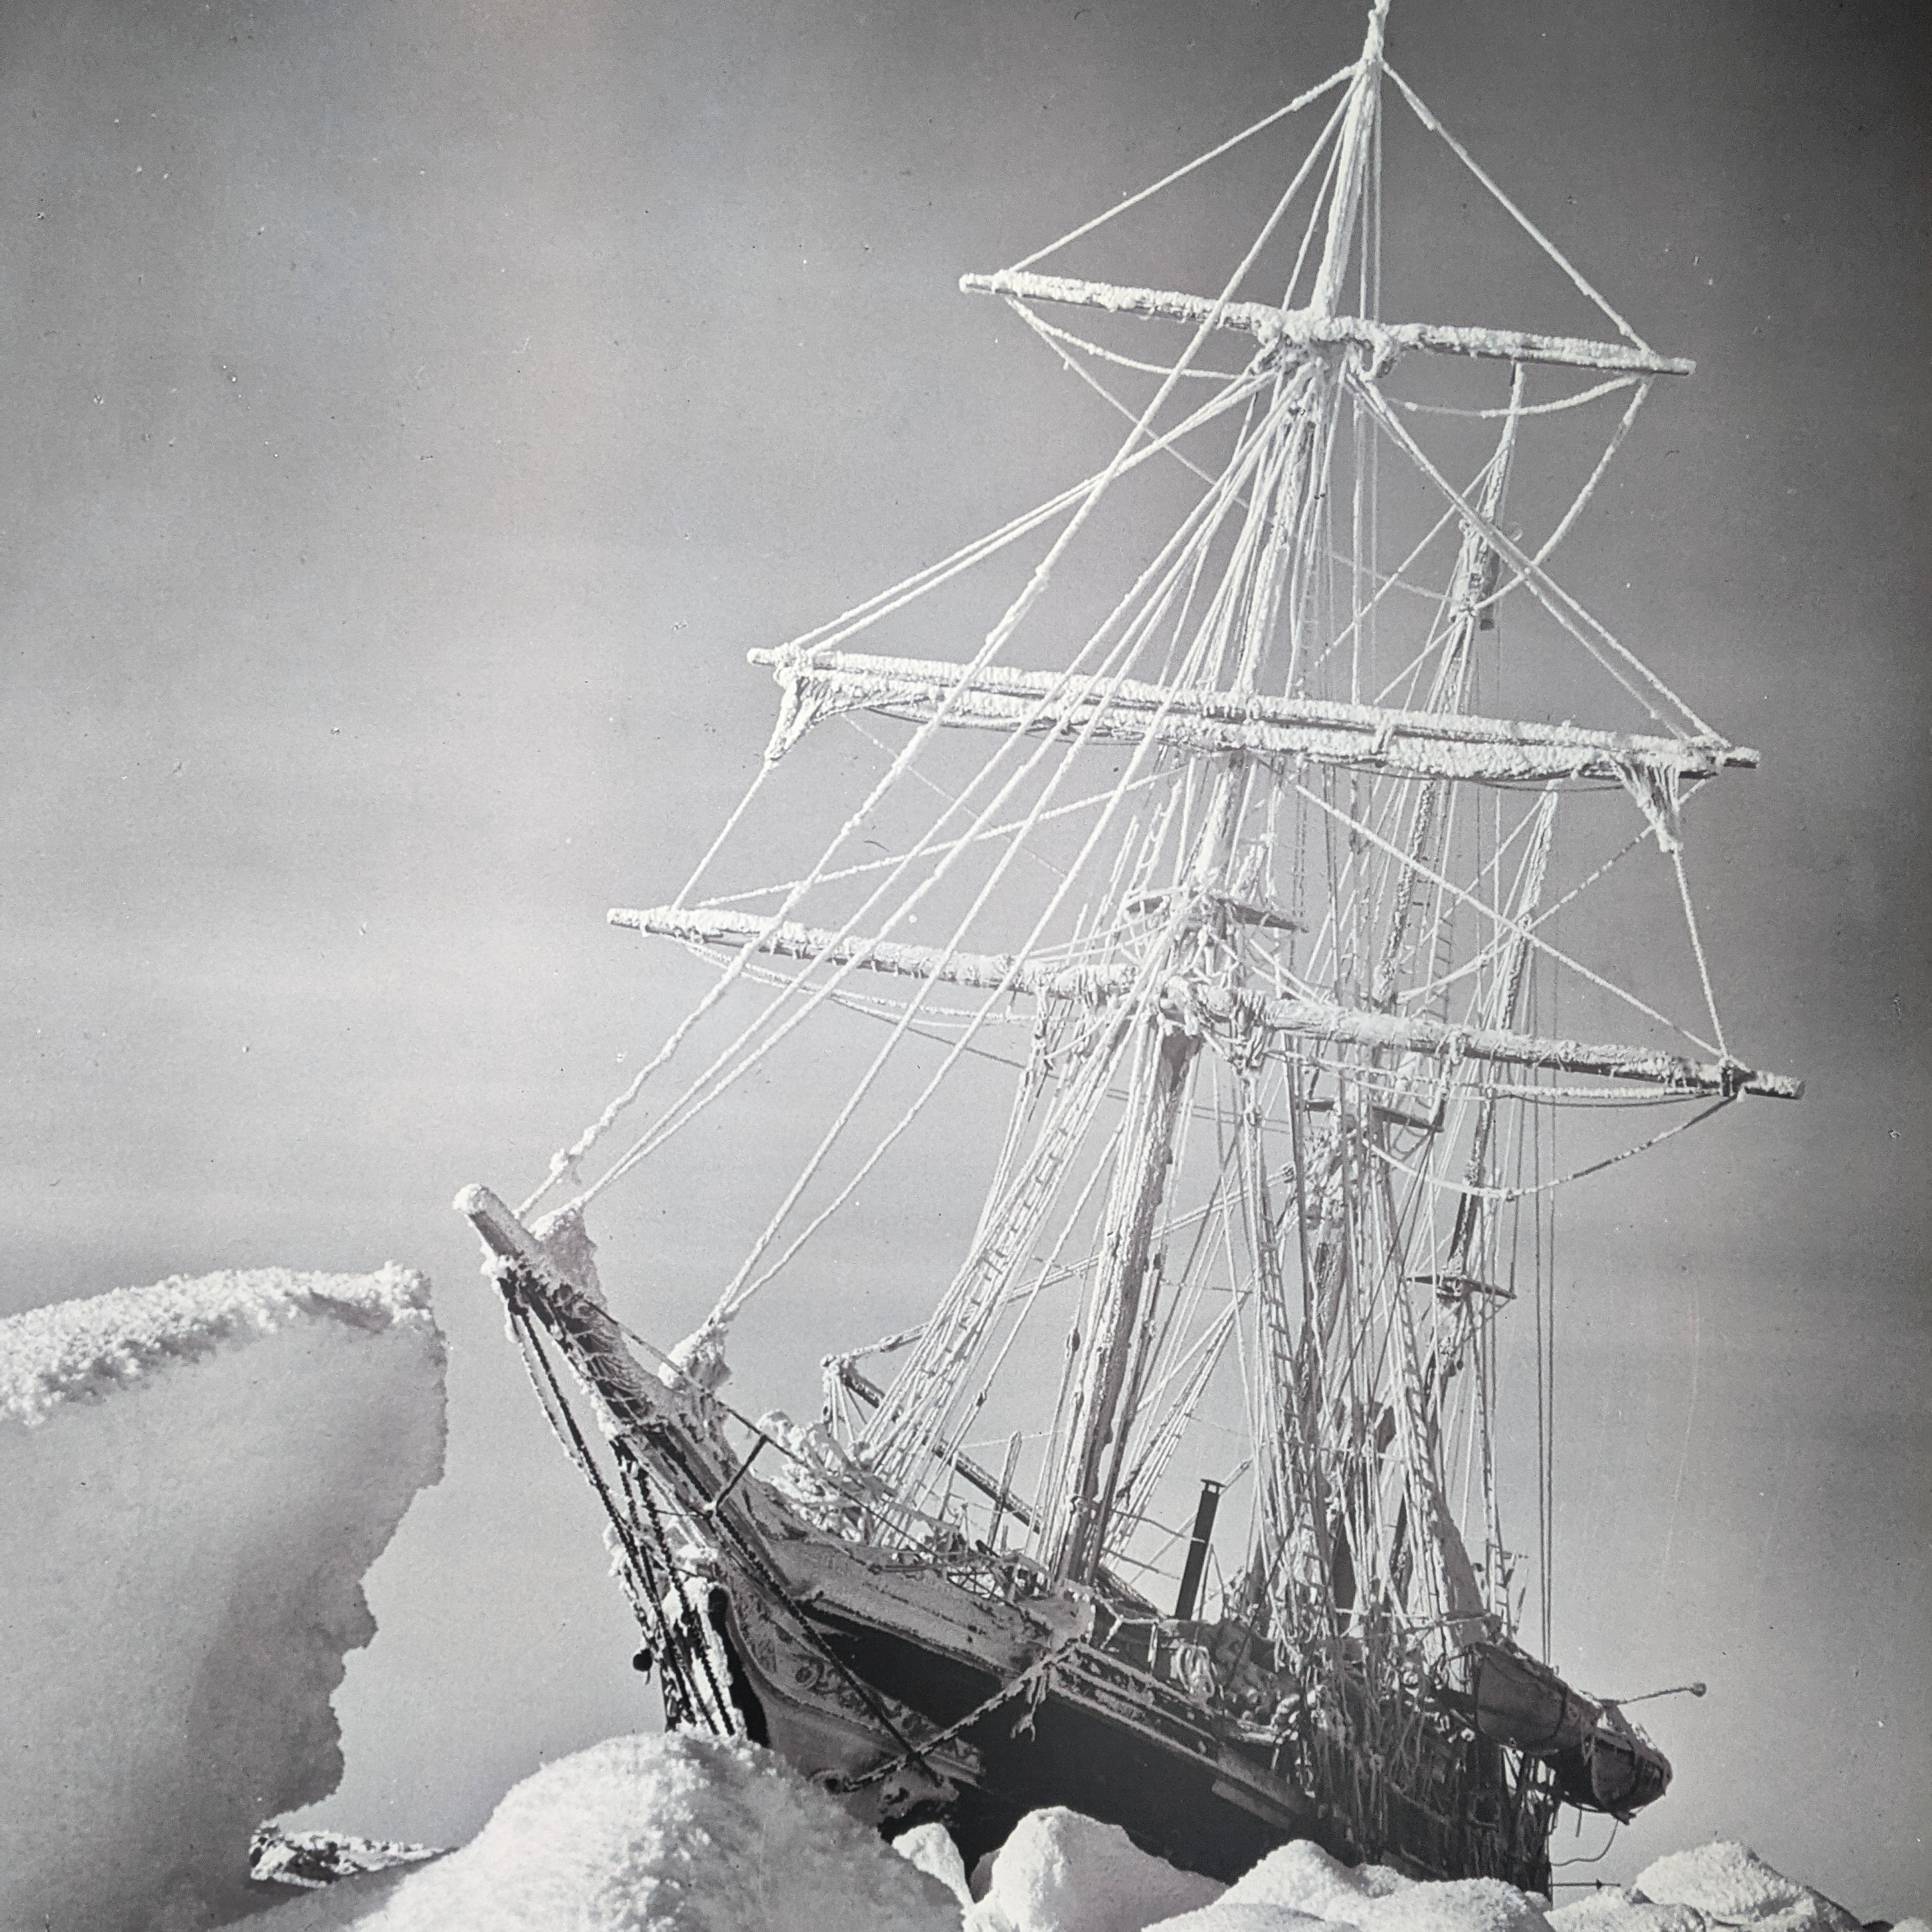 Shackleton's ship endurance stuck in ice in the antarctic